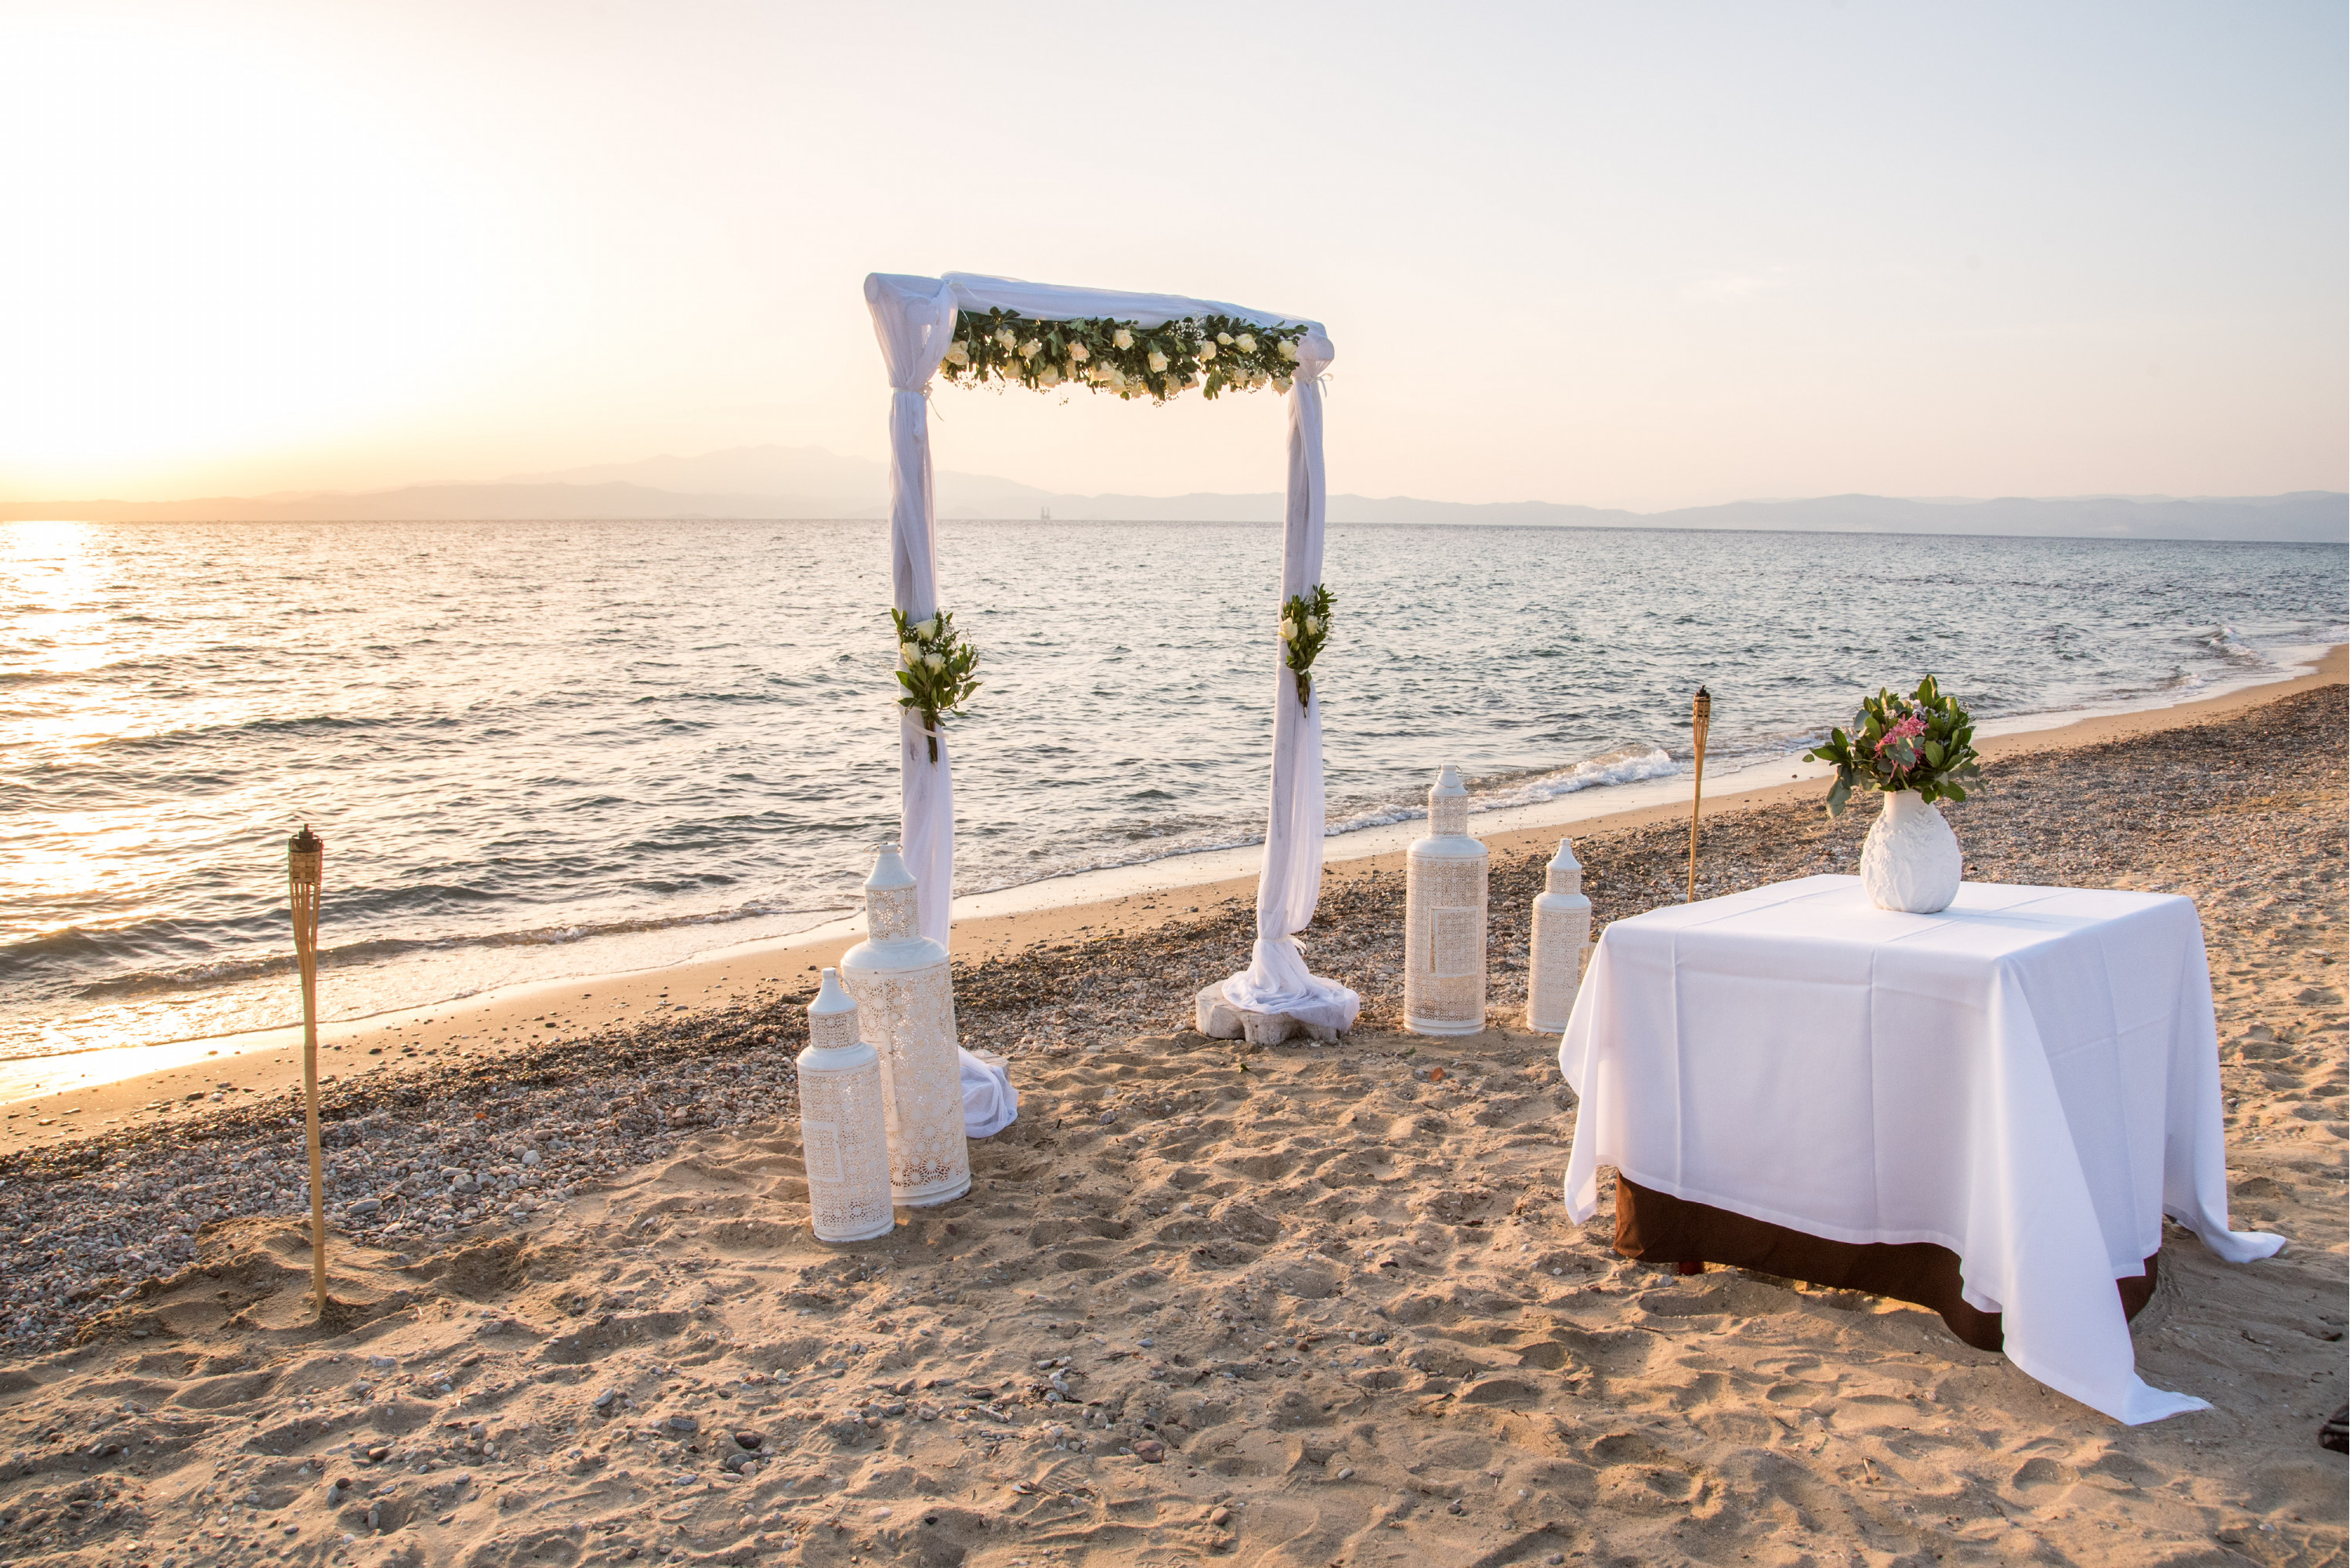 Book your wedding day in ILIOMARE